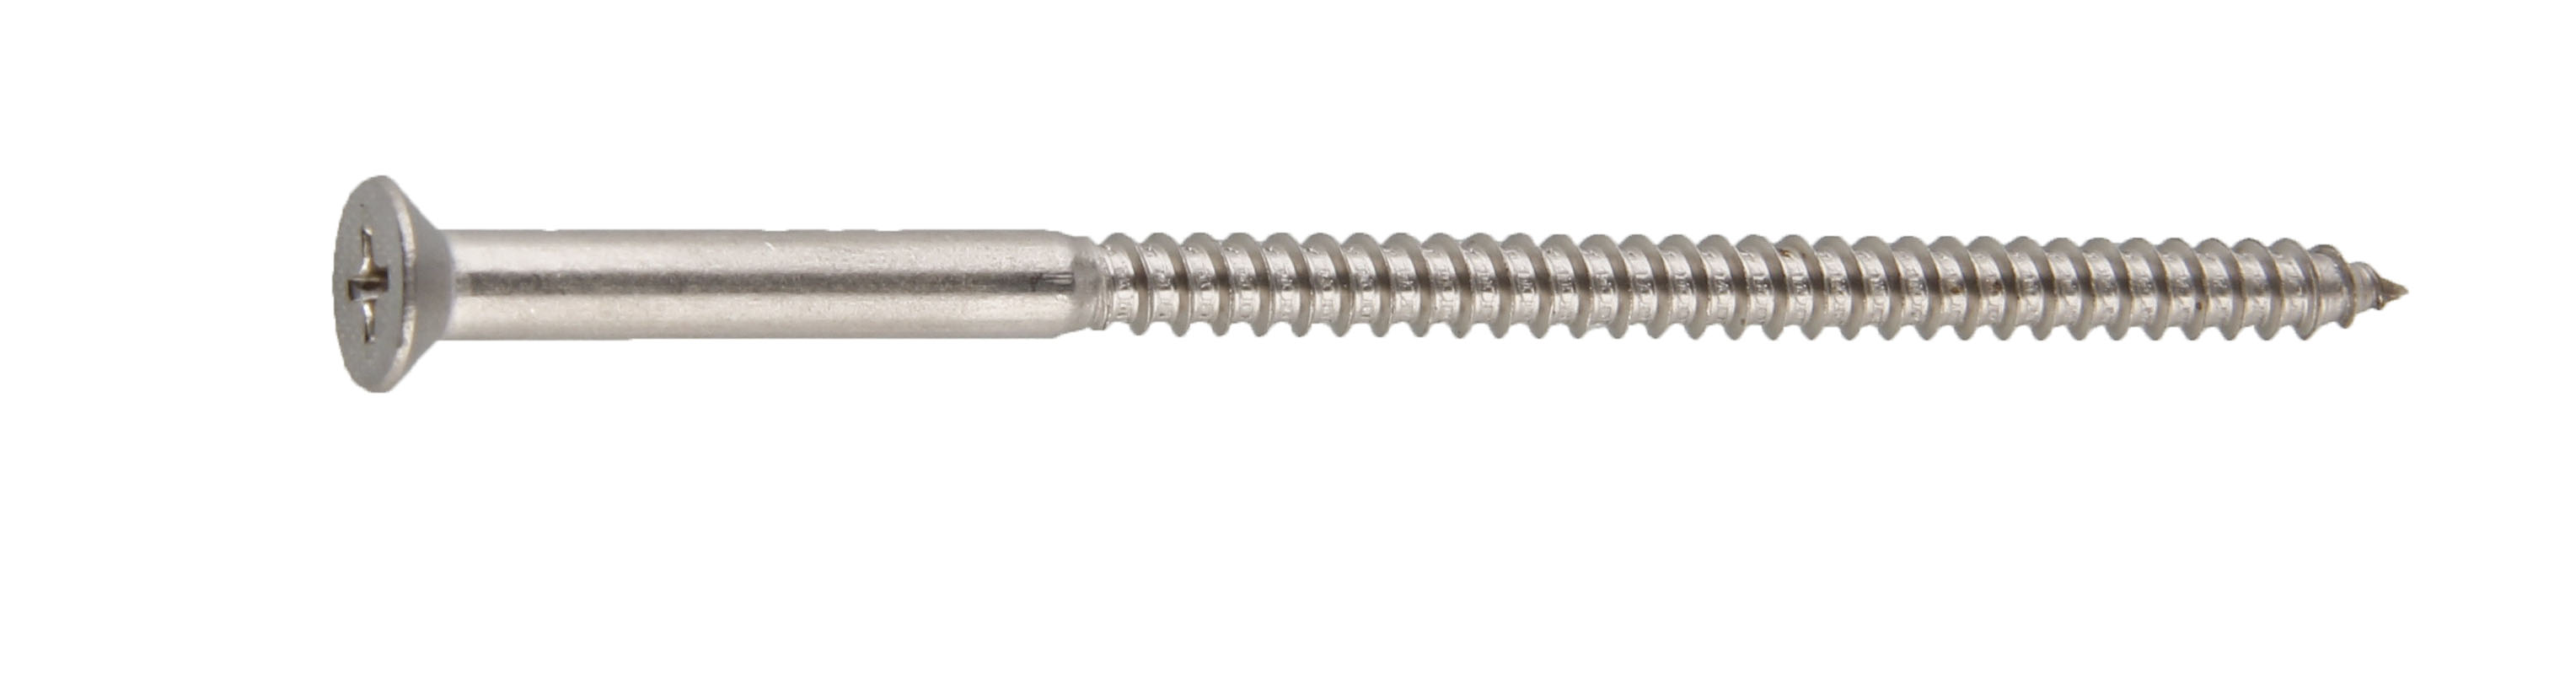 SS304 Self Tapping Screw,Phillips Countersunk Flat Head